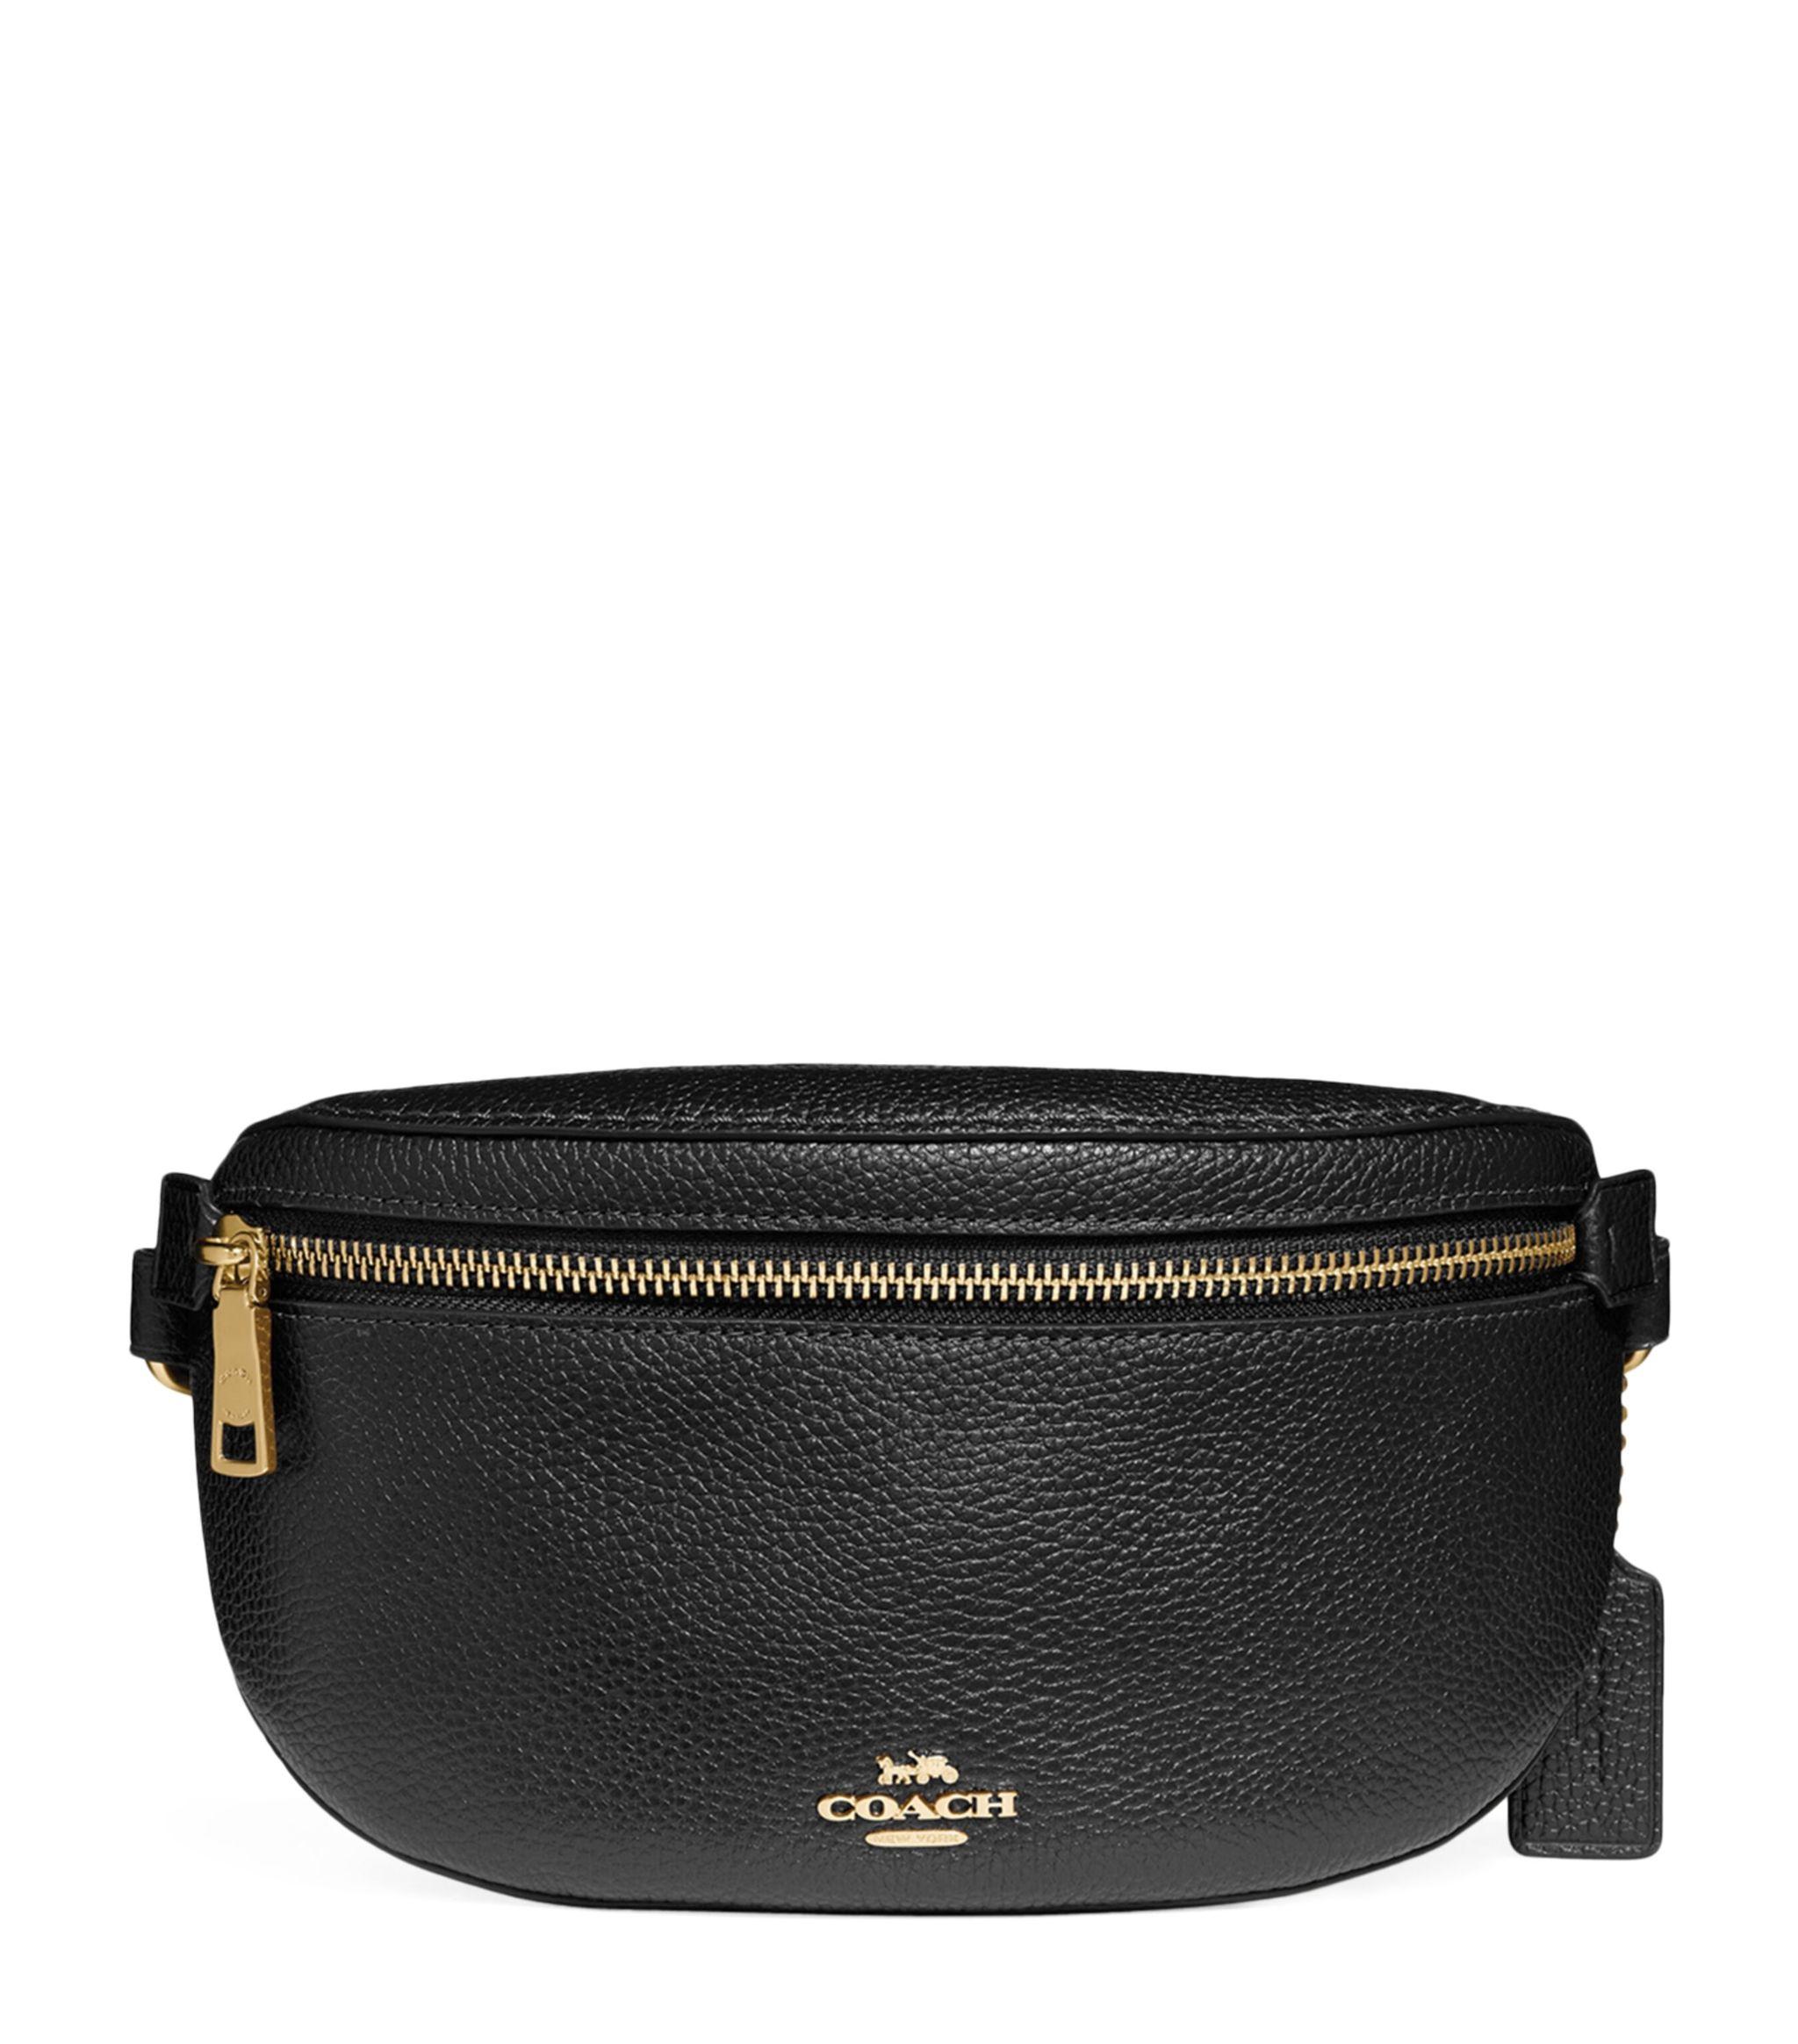 COACH Leather Bethany Belt Bag in Black | Lyst